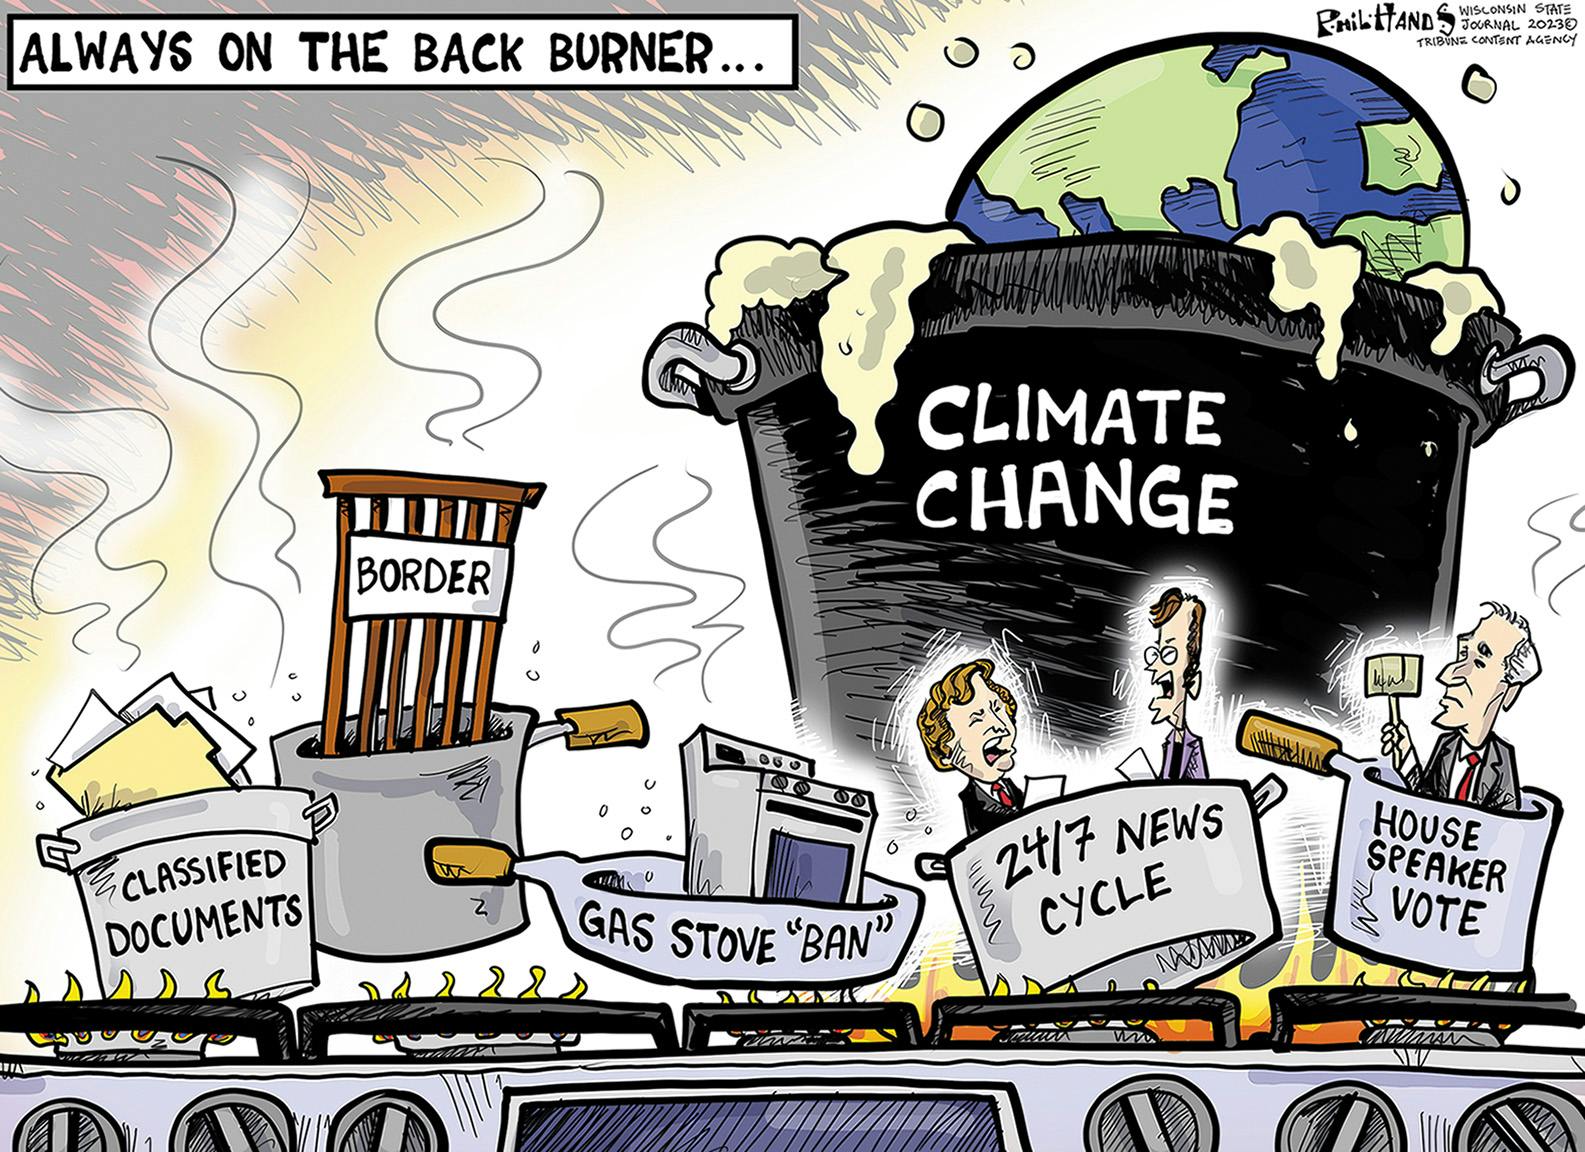 Editorial cartoon: Climate change on the back burner